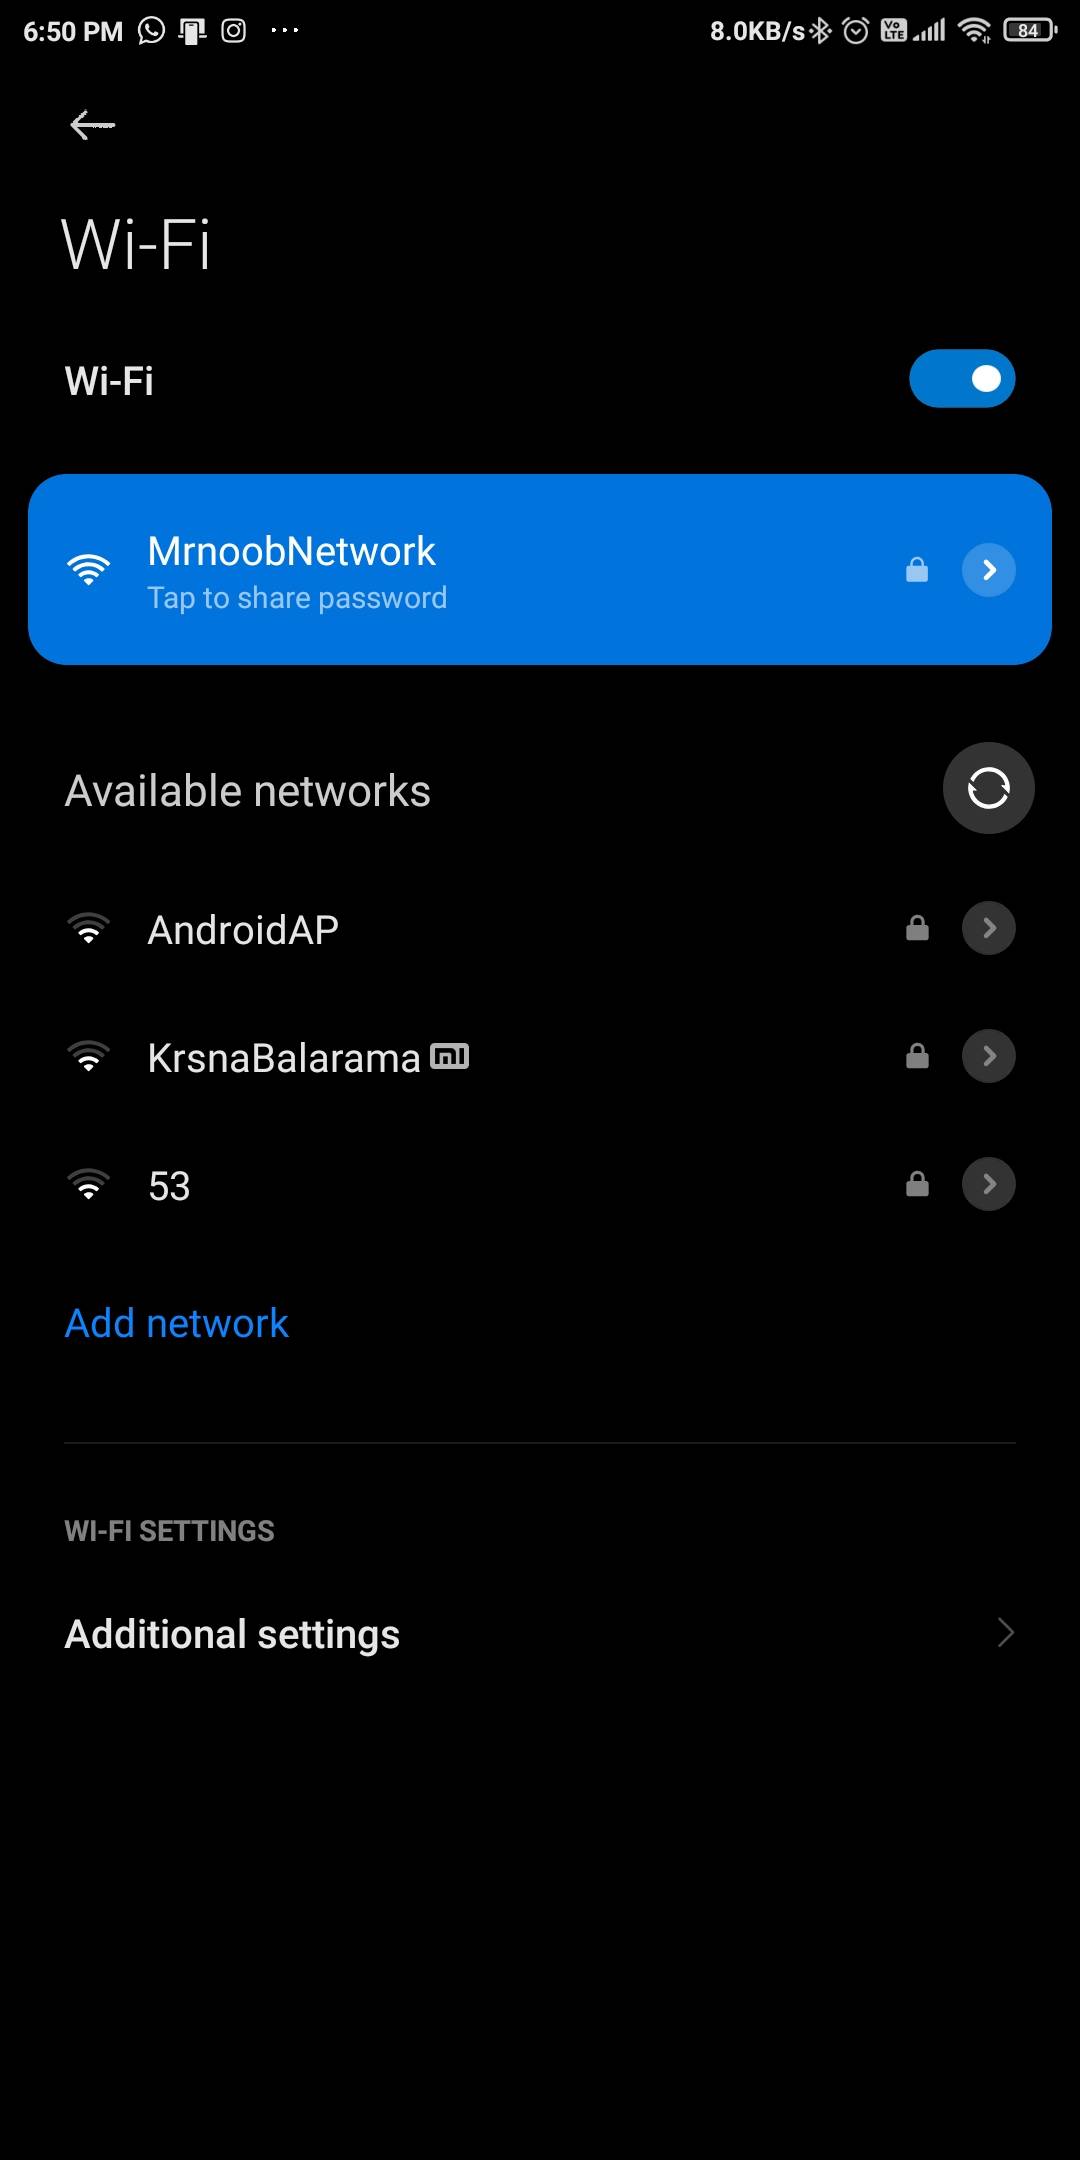 connect the second phone to common wifi